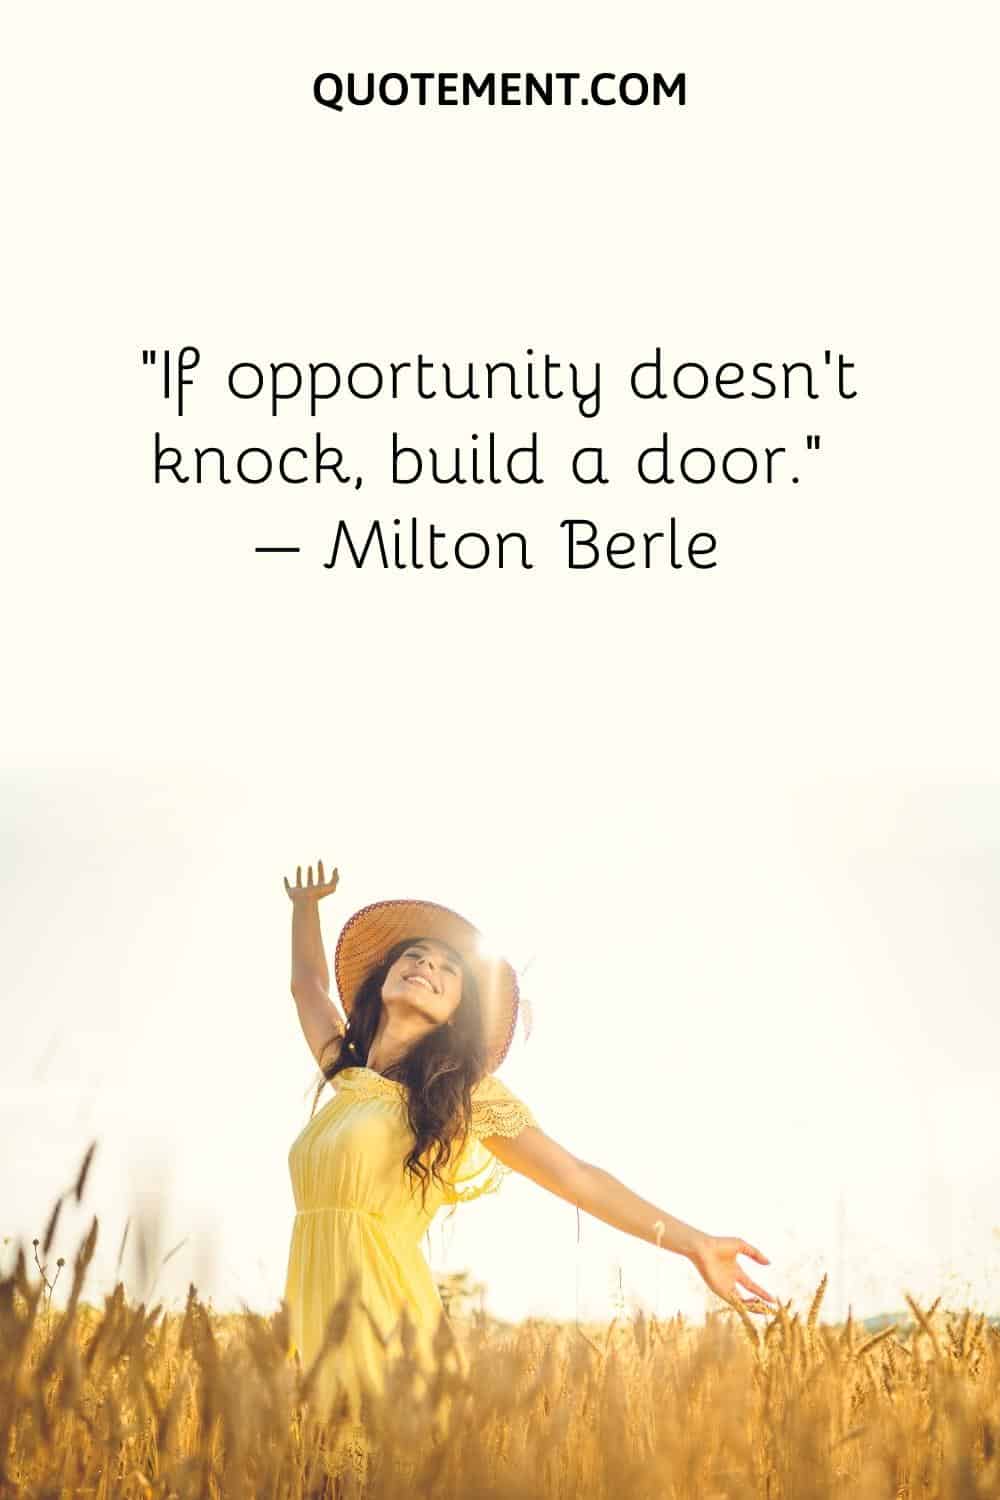 If opportunity doesn't knock, build a door